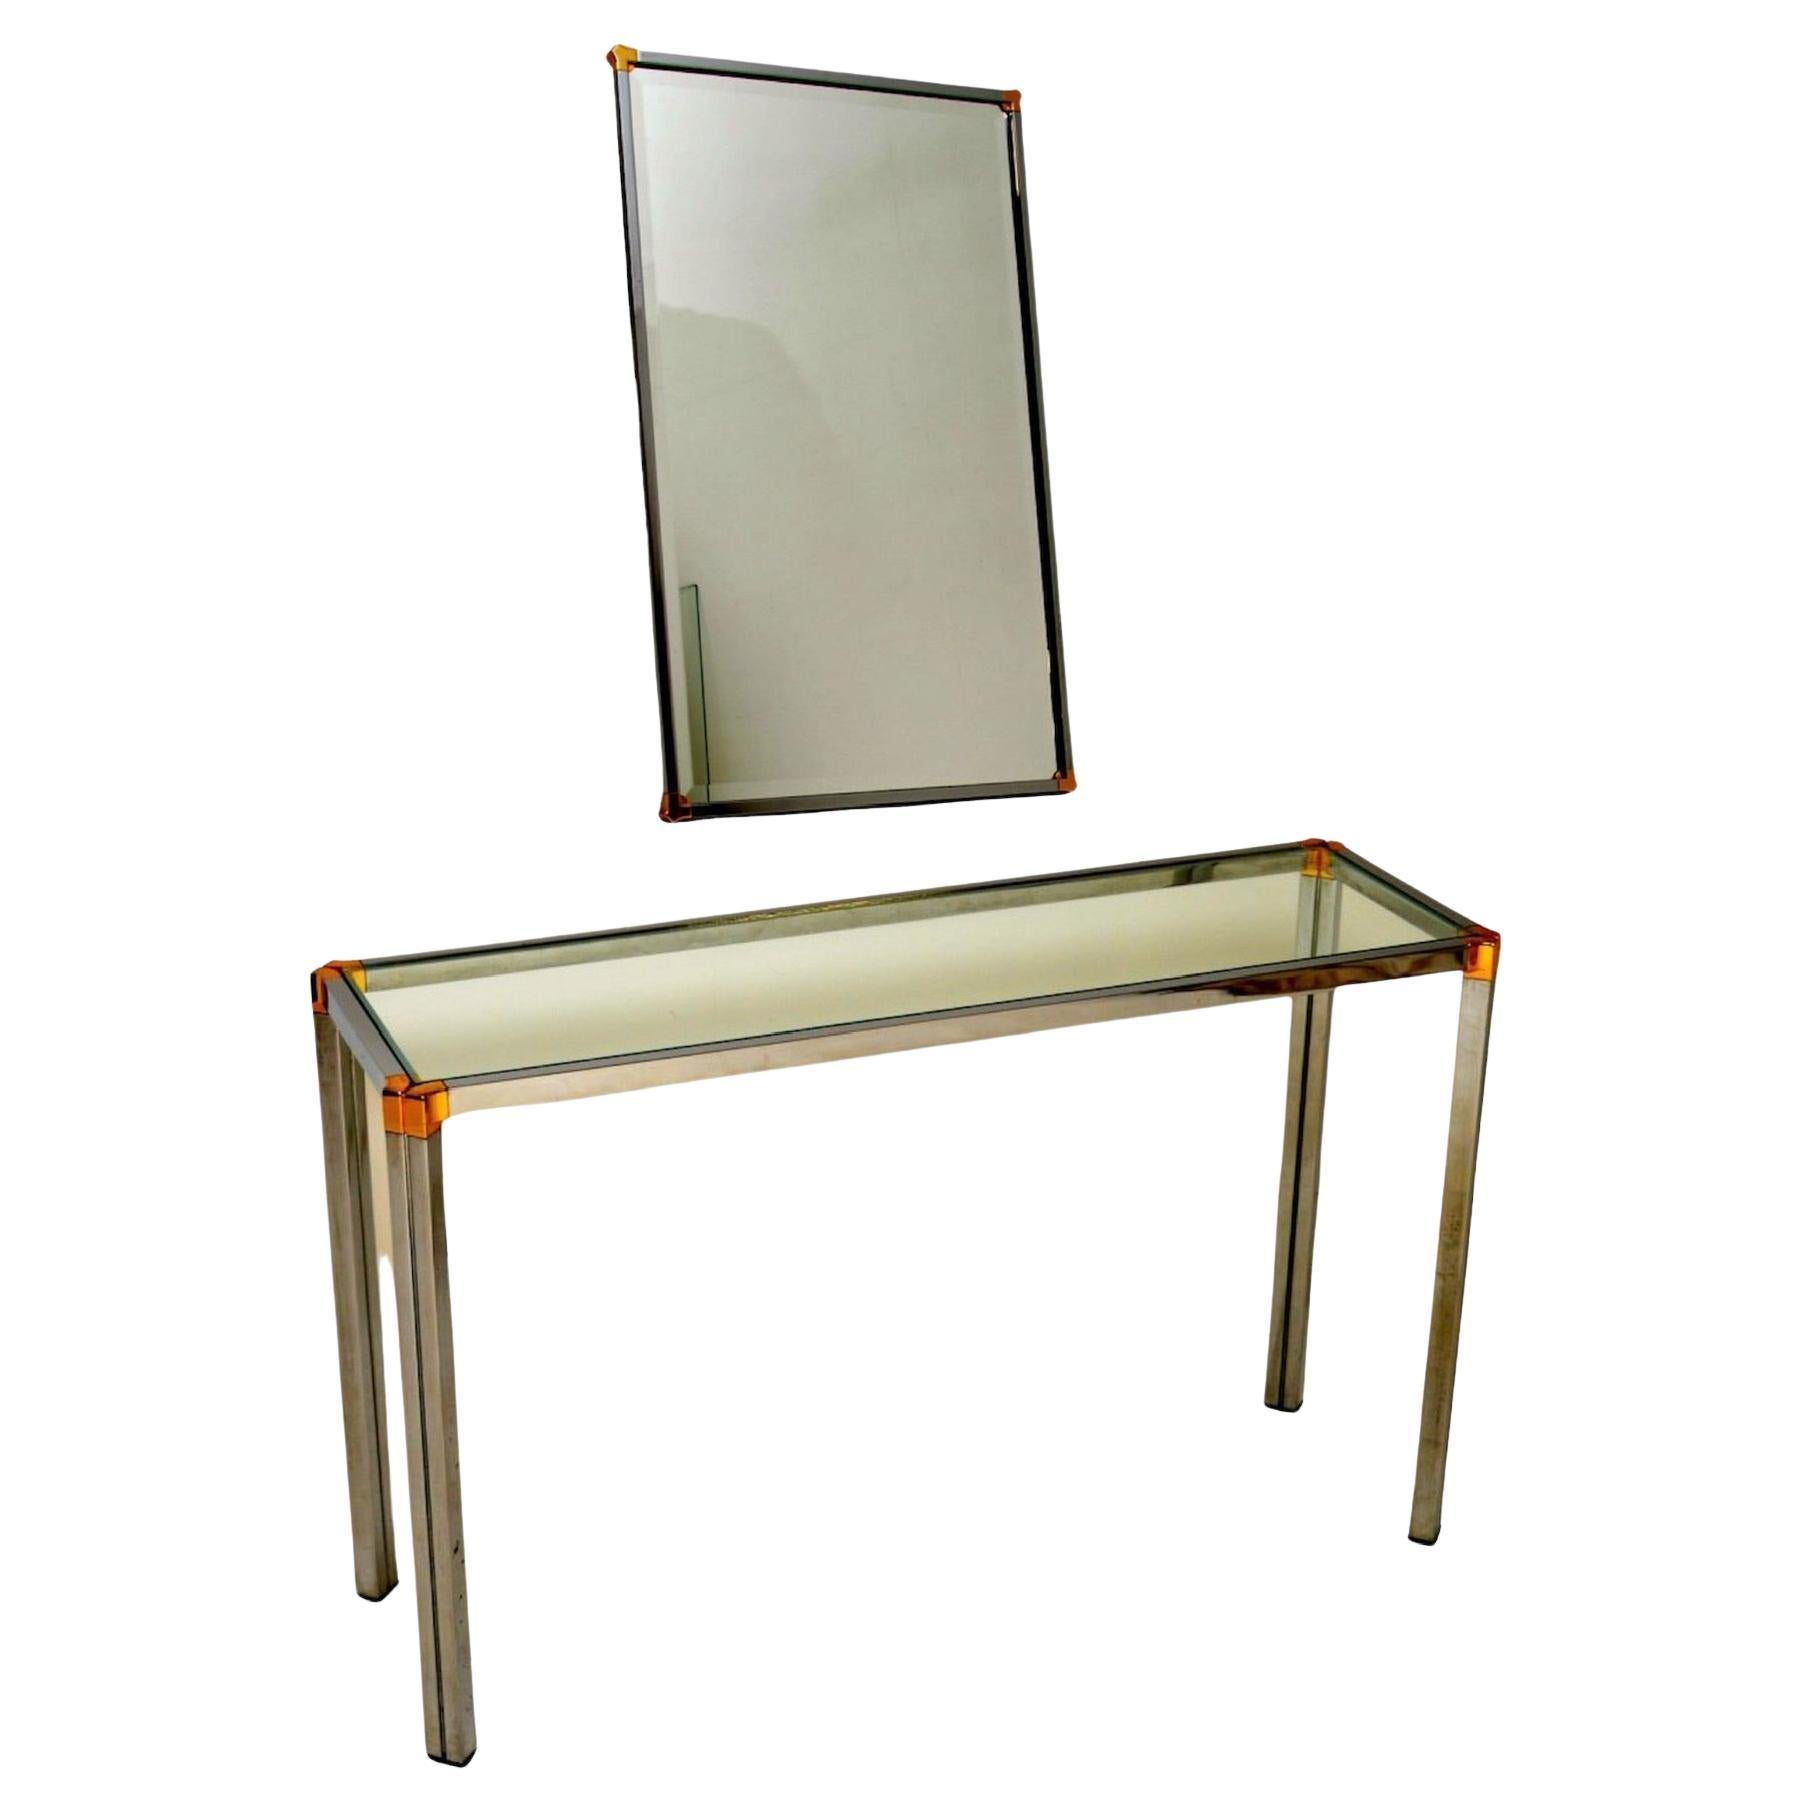 Vintage Chrome and Brass Console Table with Mirror